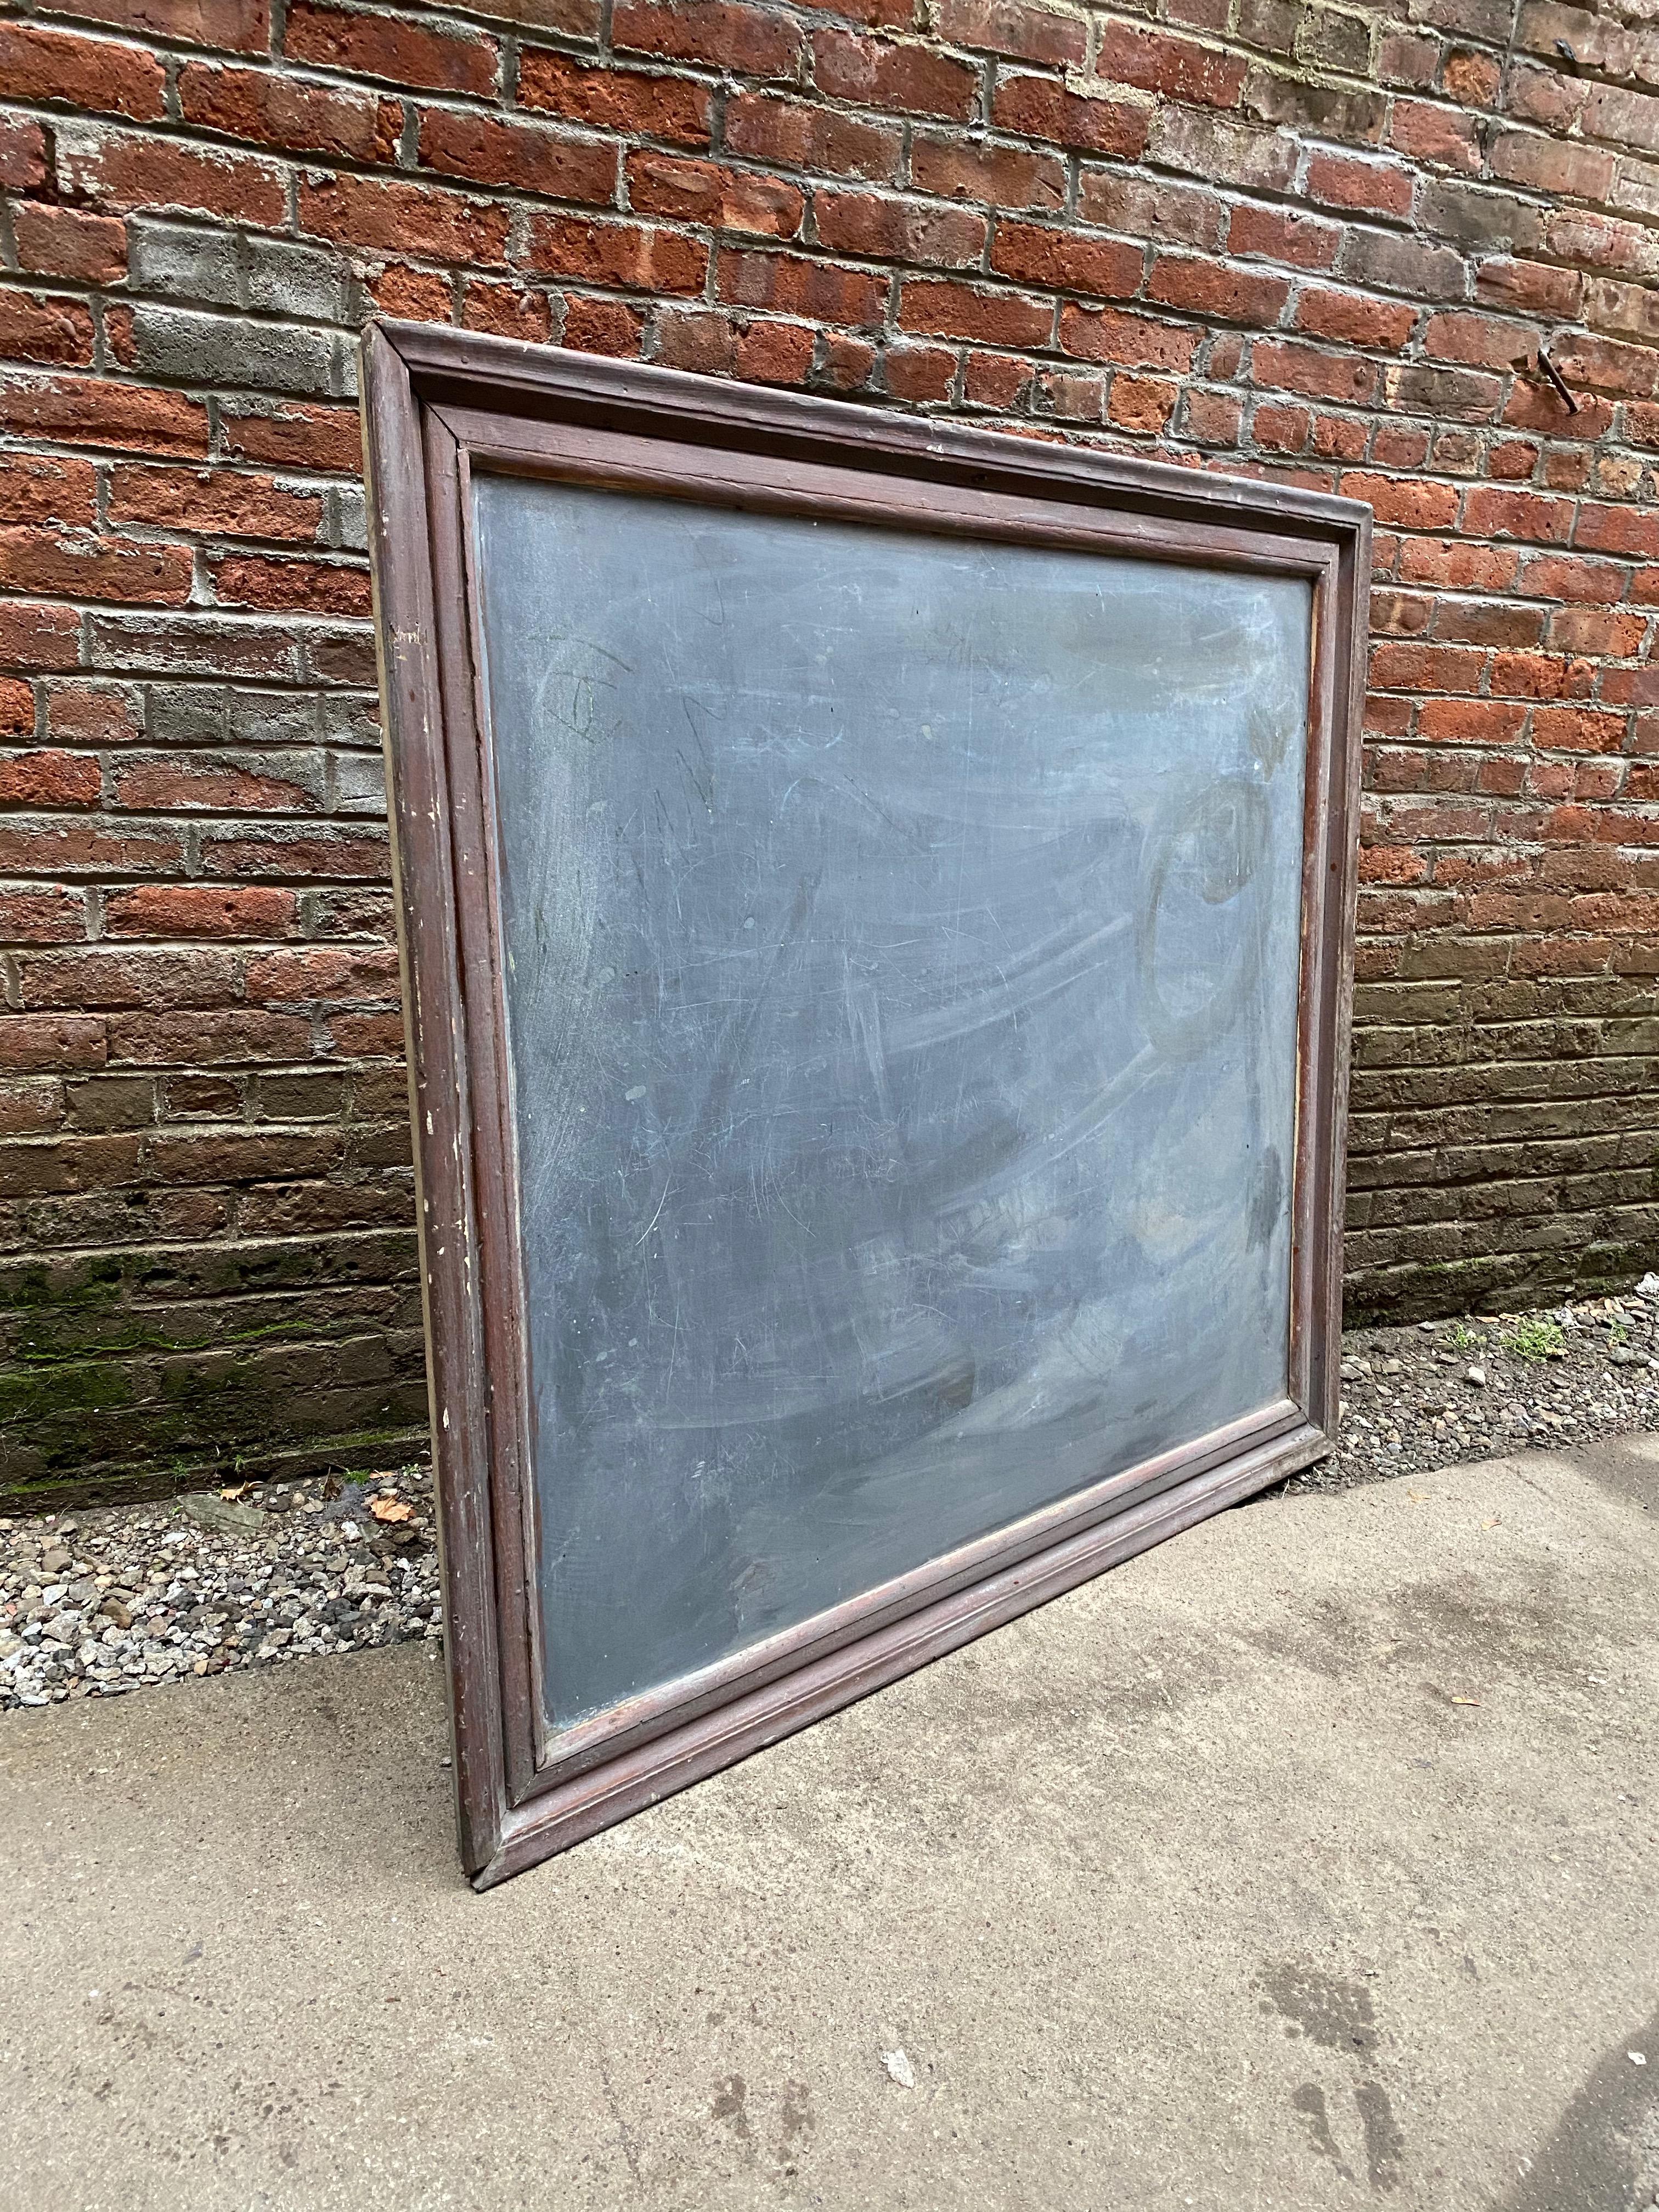 Large and impressive thick slate school house chalkboard. Distressed and painted wood frame. This single piece of slate measures around .50